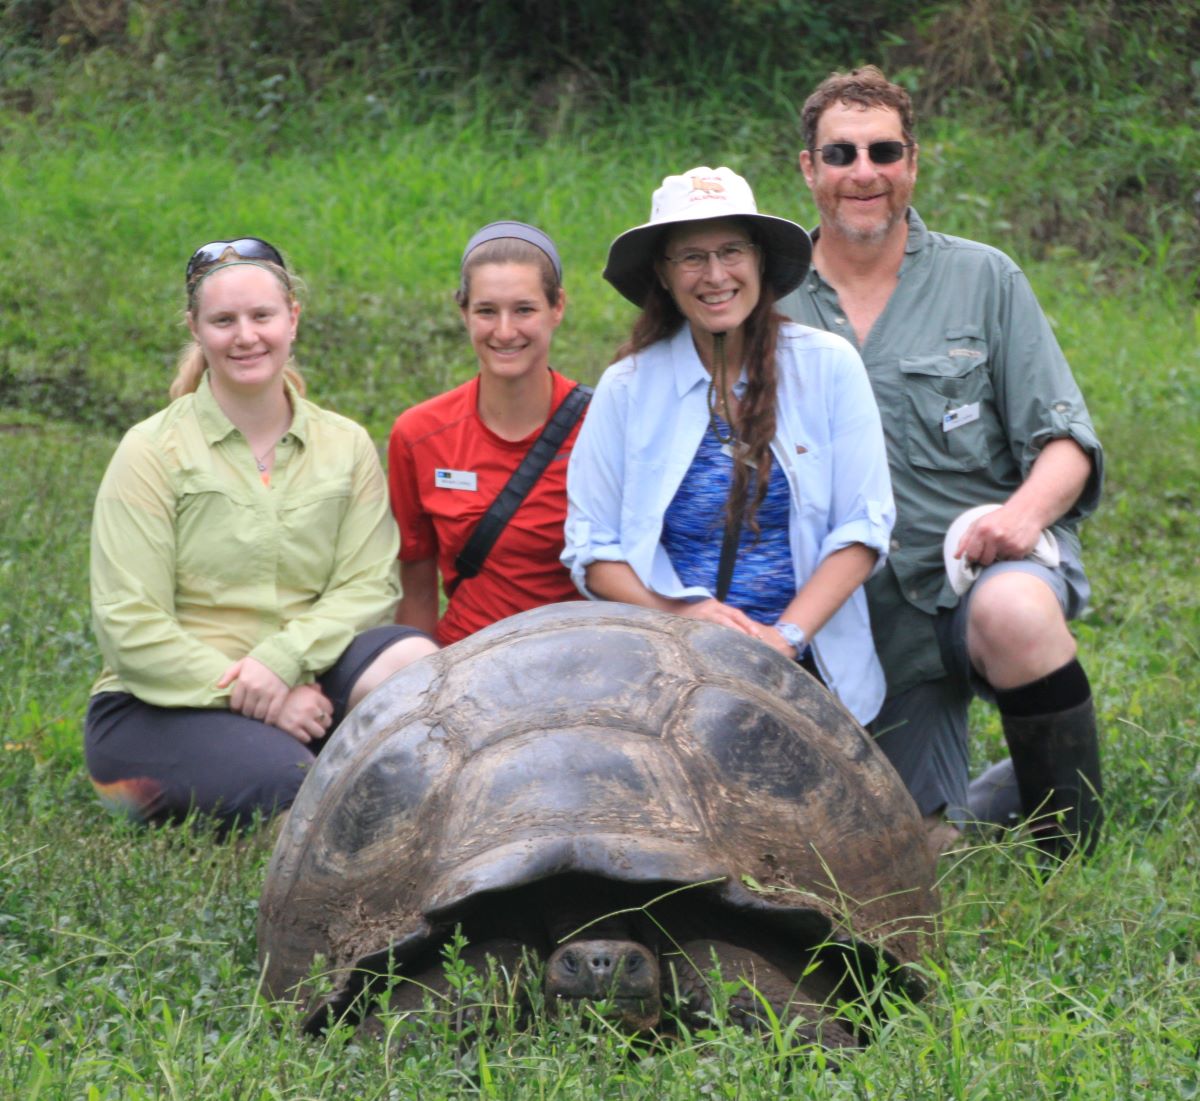 Professor Ledley with wife Tamara and daughters Johanna and Miriam in the Galapagos.